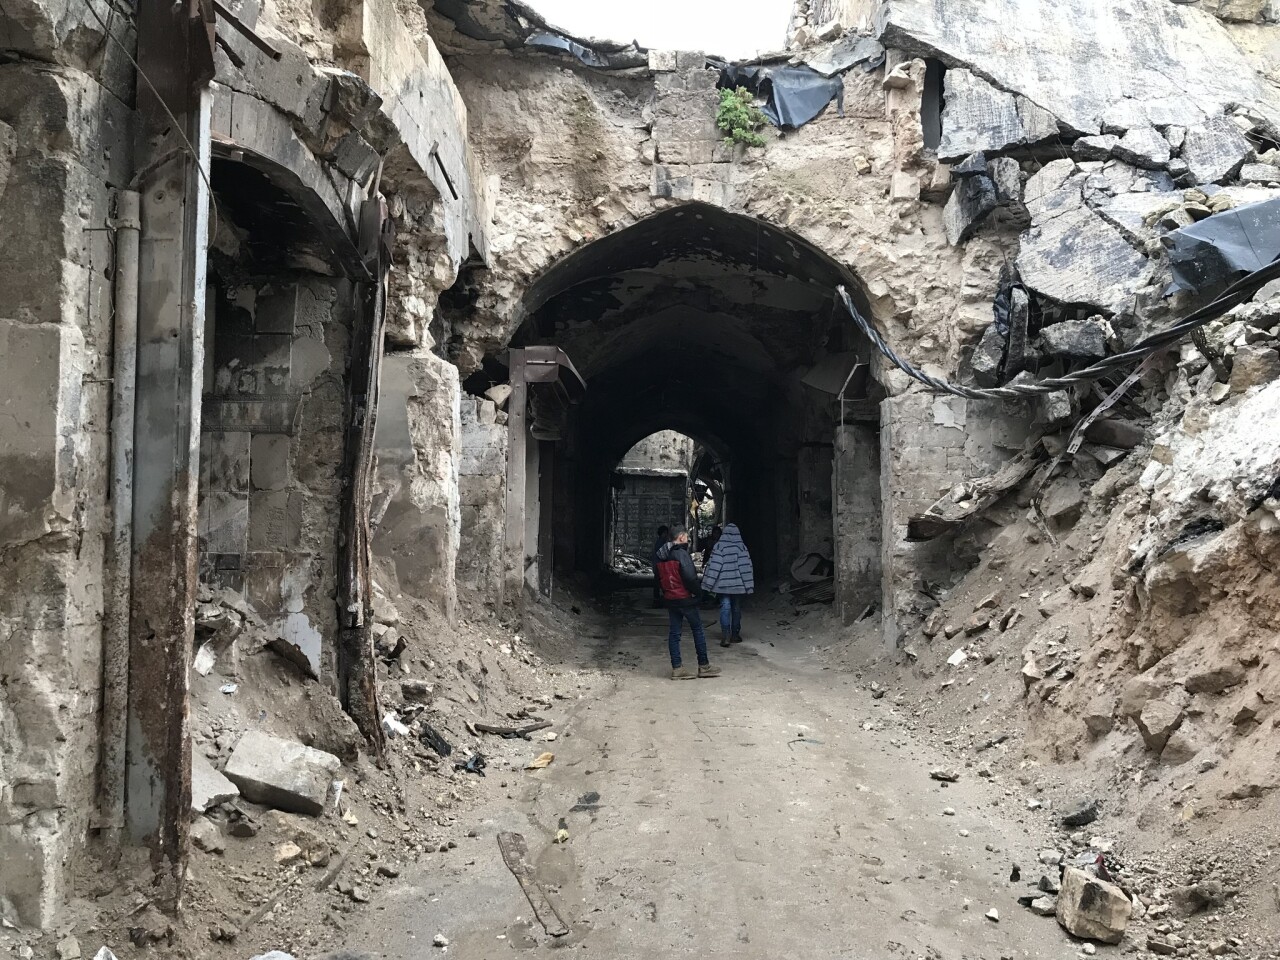 Children explore the ruins of the Old City of Aleppo.